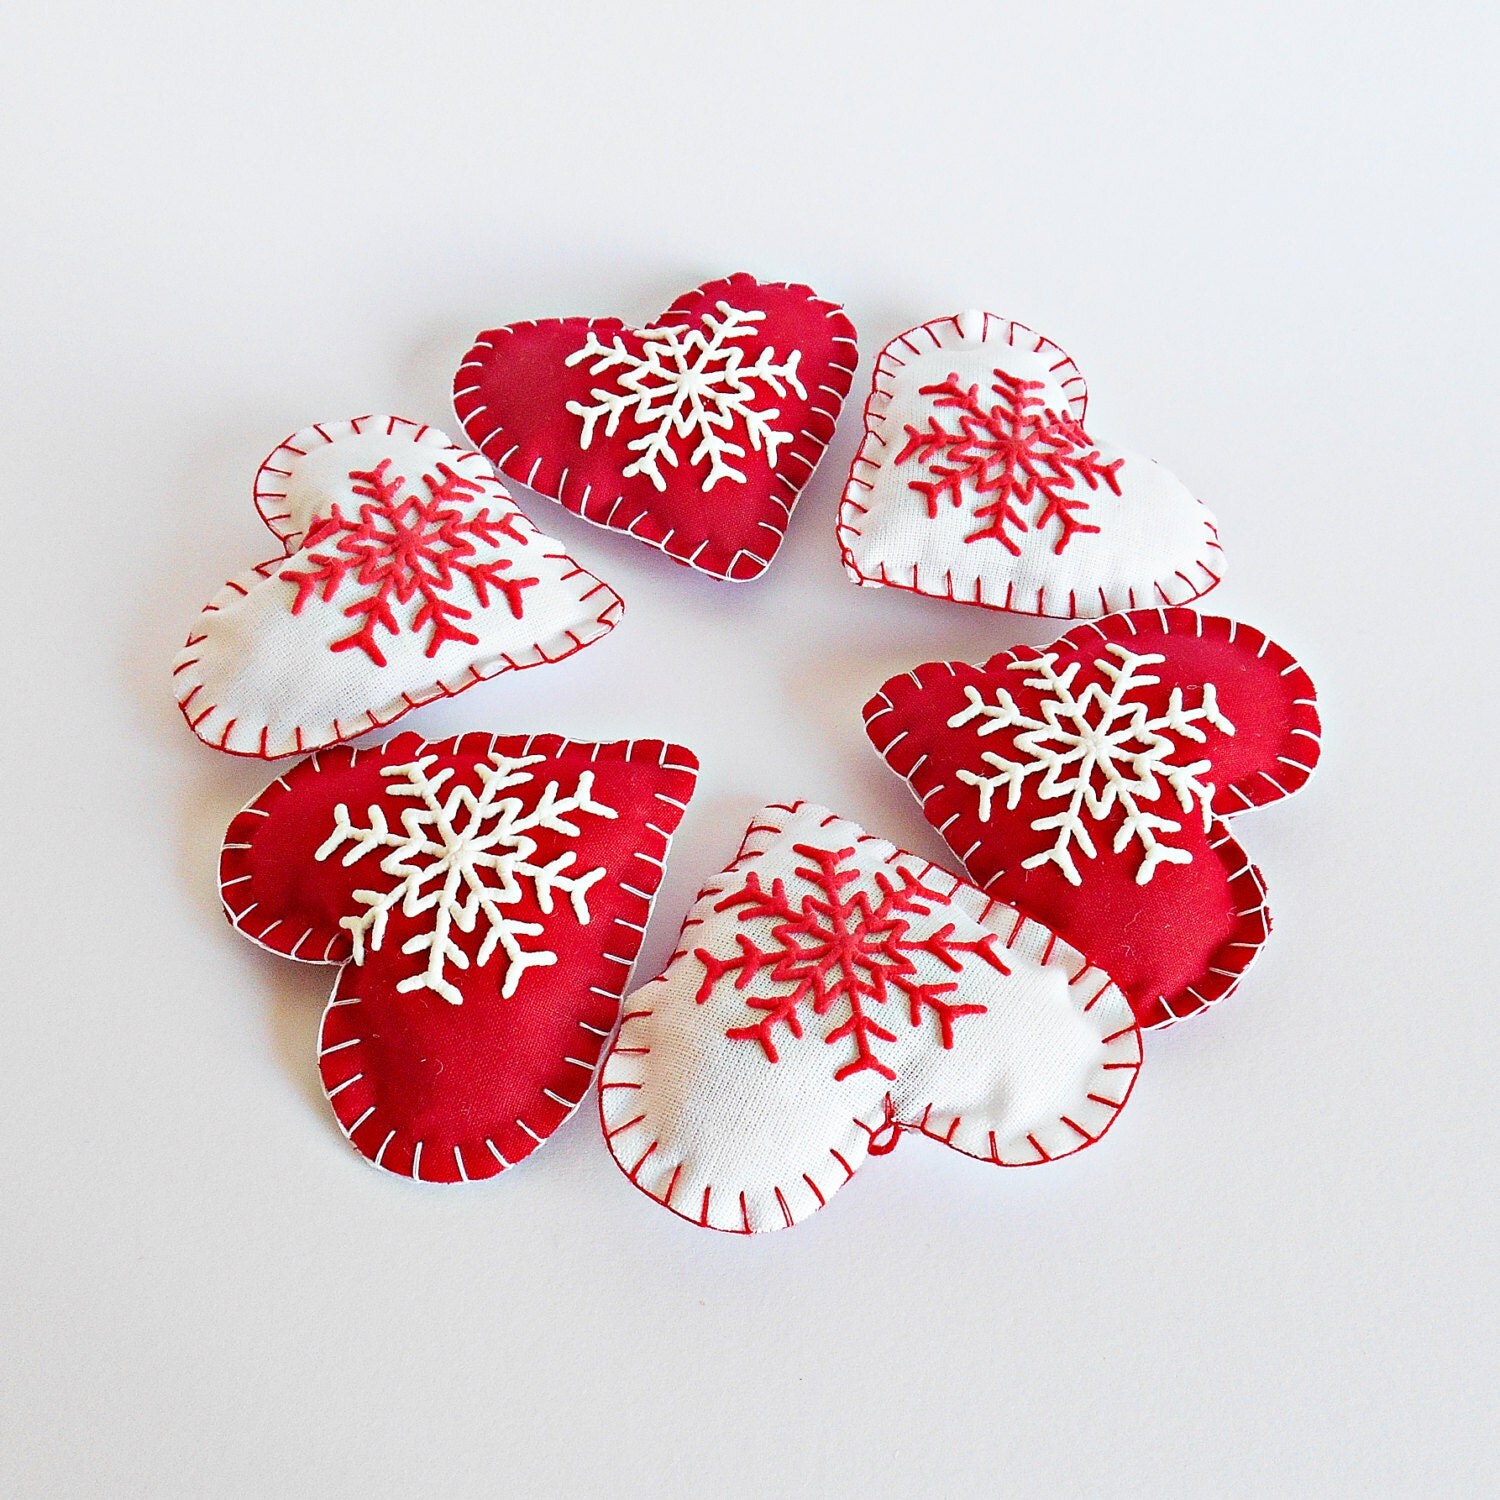 Set of 6 Christmas Hanging Fabric Love Heart with Snowflake in Red and White,Winter Hearts Ornament, Wedding Favor, Christmas Red Hearts